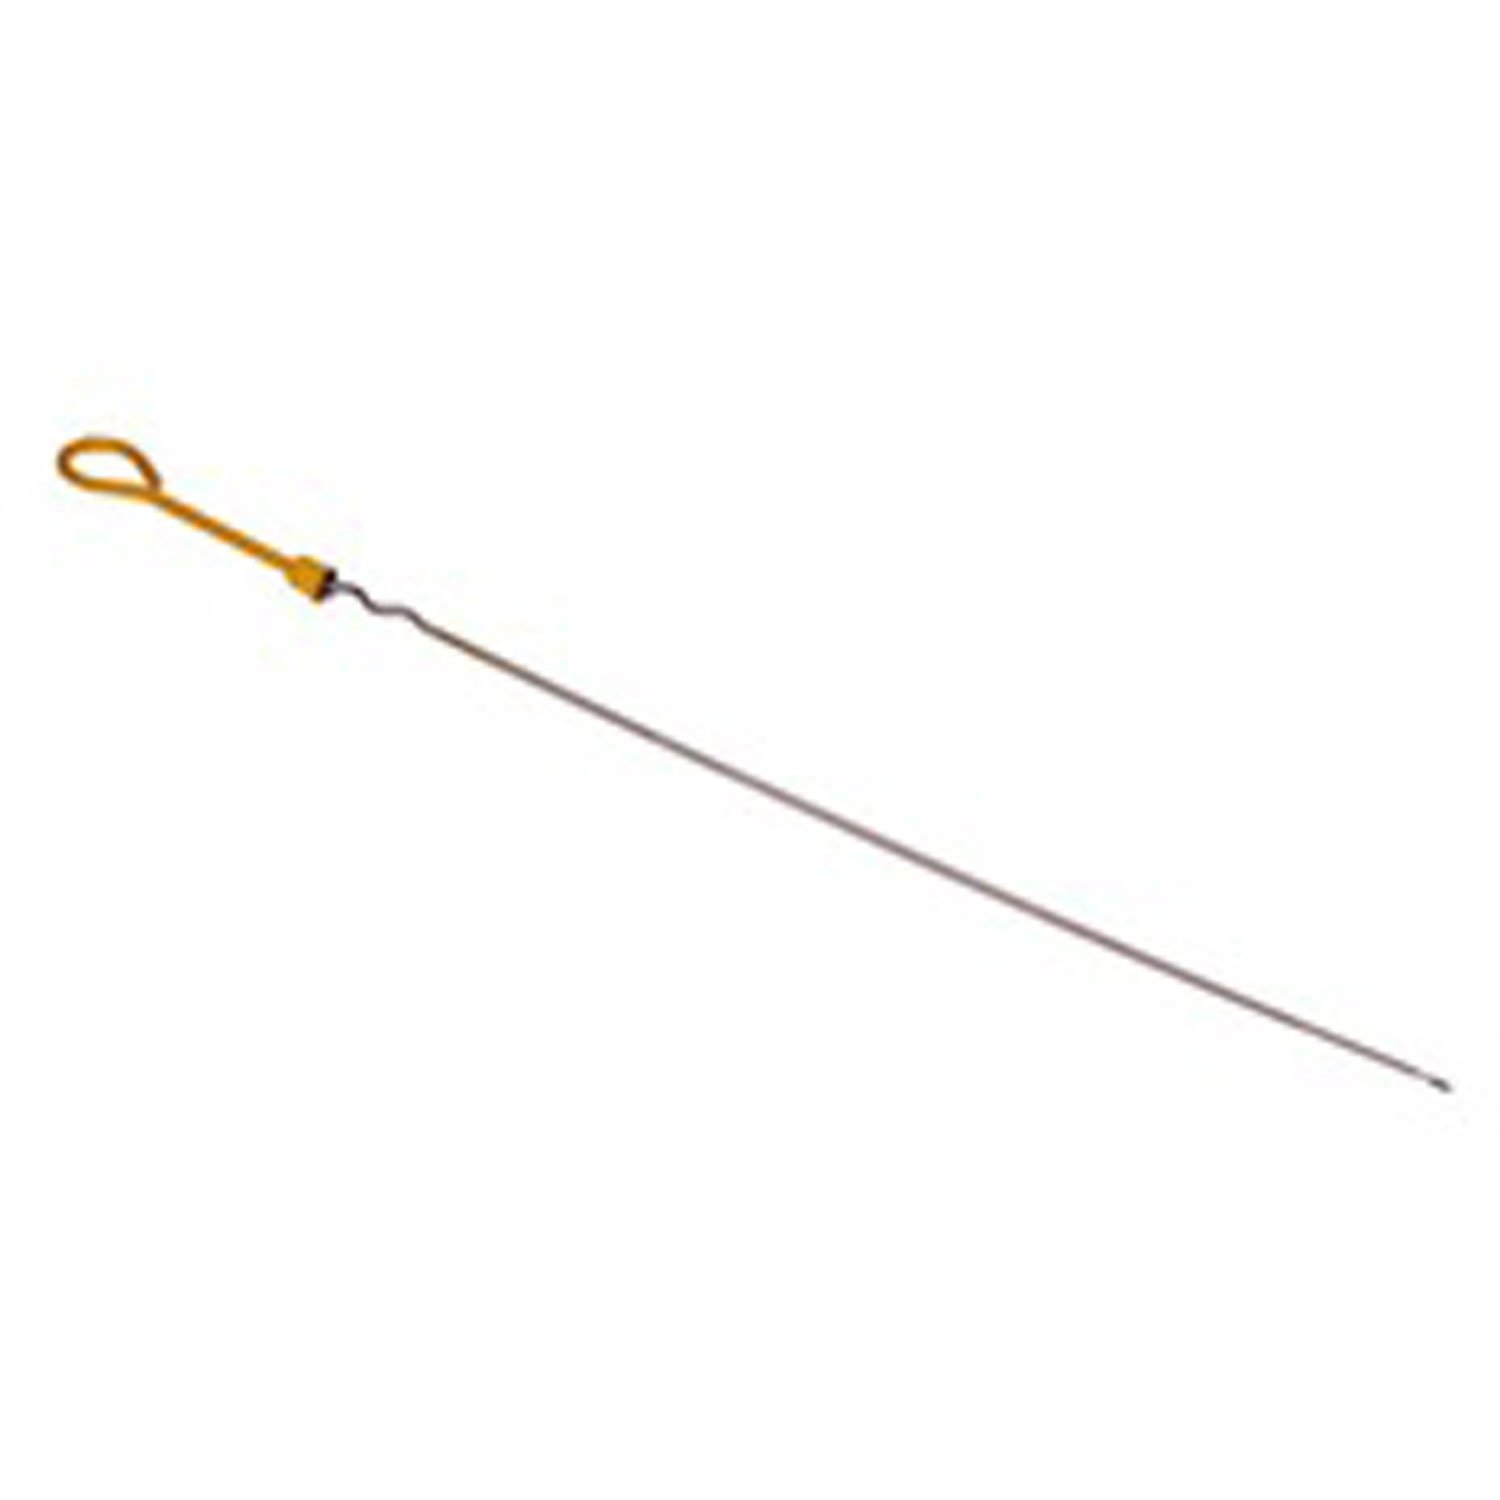 Replacement oil dipstick from Omix-ADA, Fits 97-06 Jeep TJ and 04-06 LJ Wrangler with 4.0 liter engines.